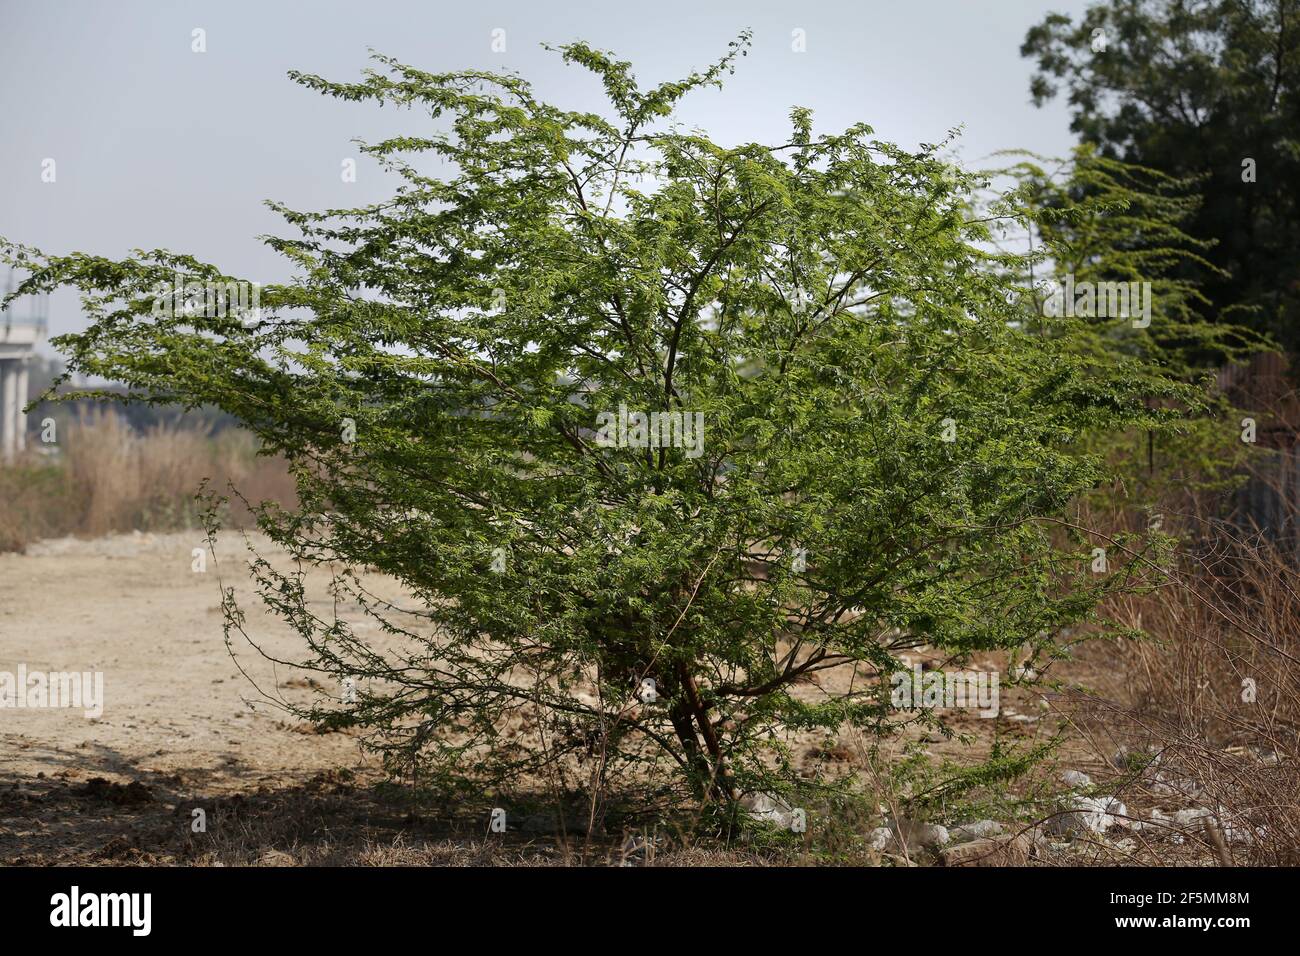 Acacia tree during day time Stock Photo